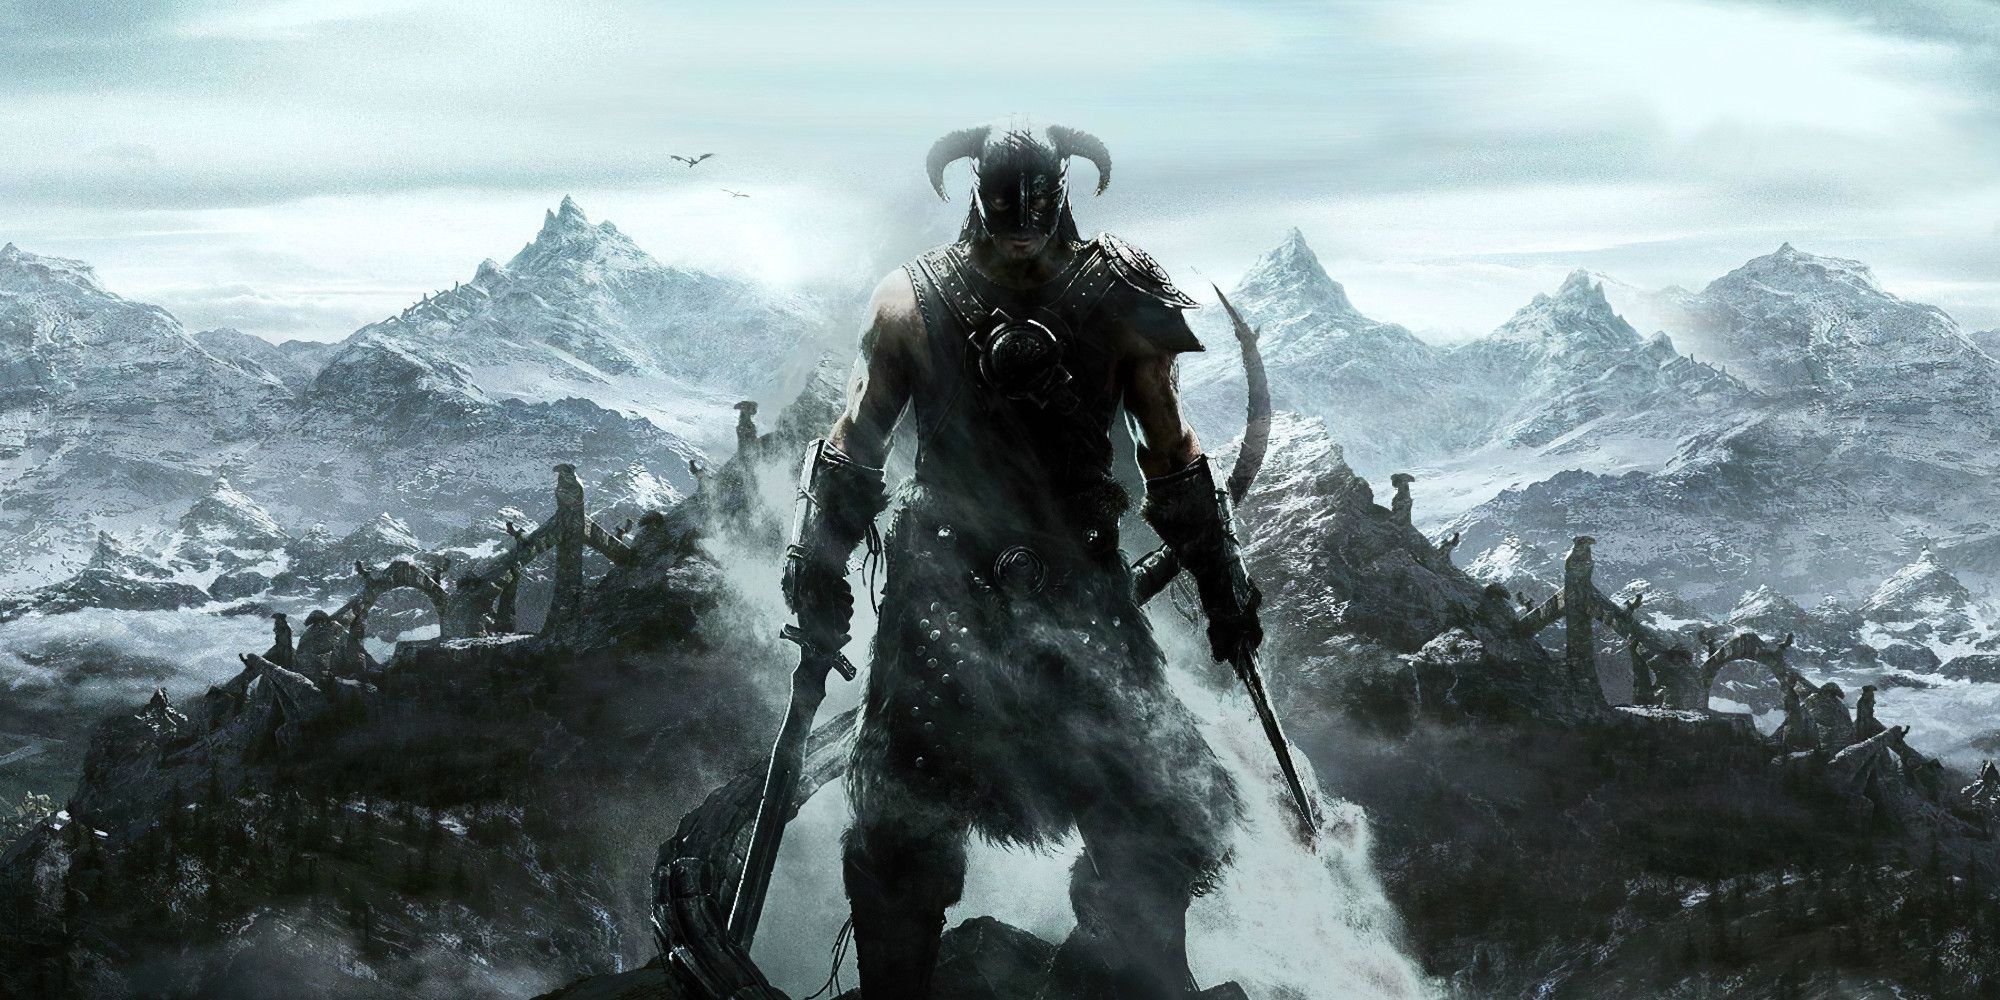 skyrim's protagonist stands on a mountain